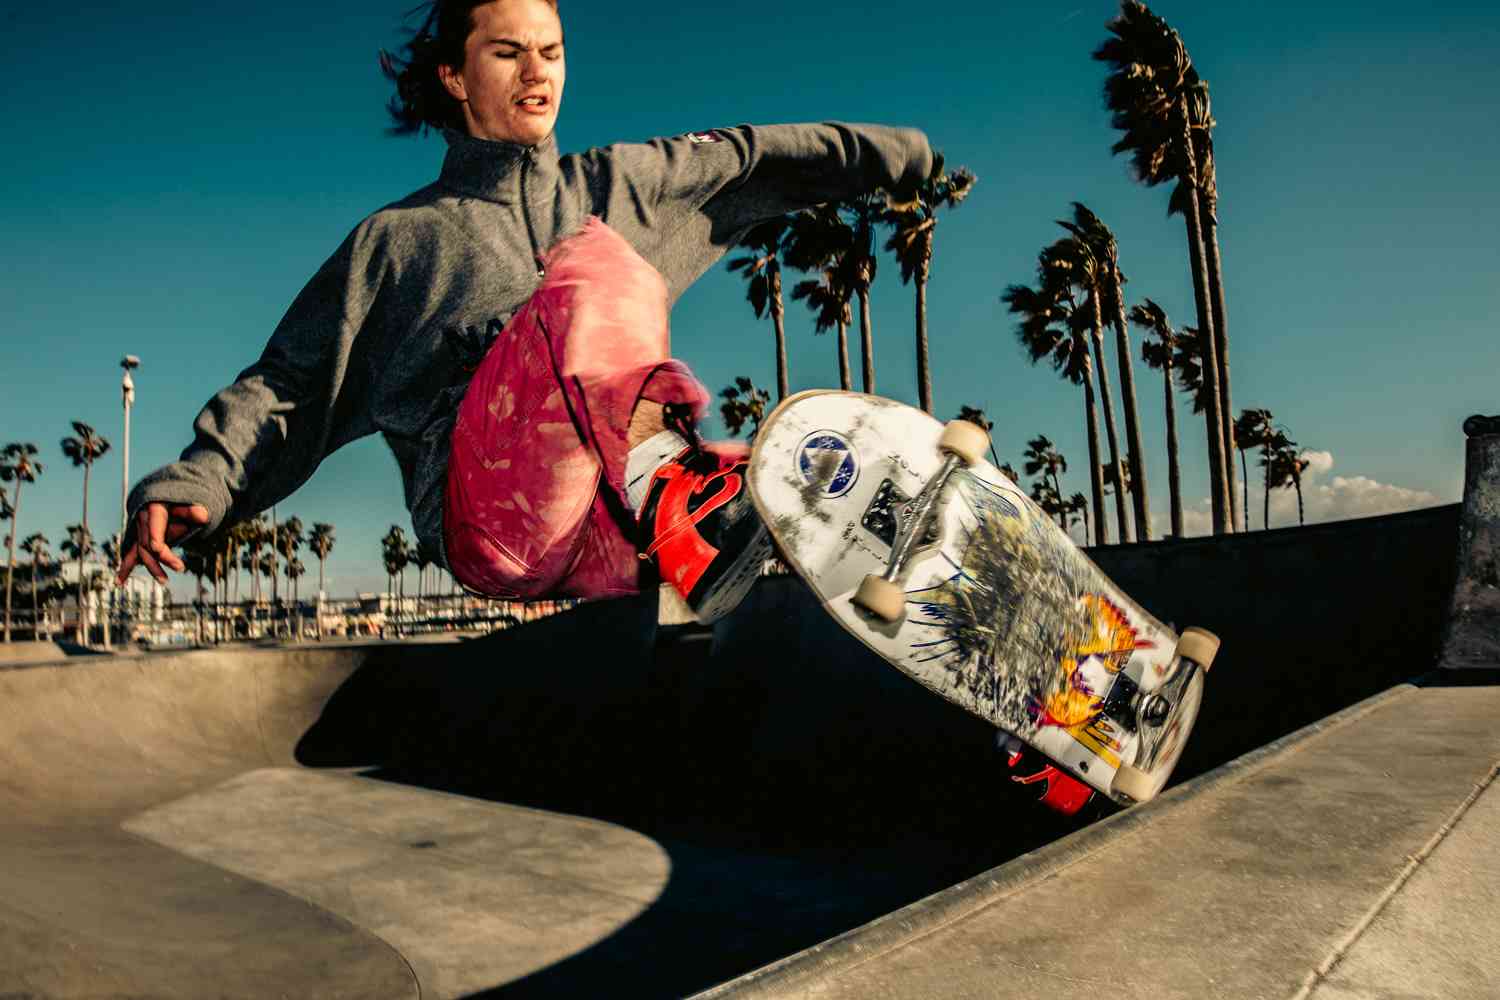 Iconic Editorial Images of SKATE PARK VENICE BEACH, a photo taken by Warwick Saint in The Saint Studio